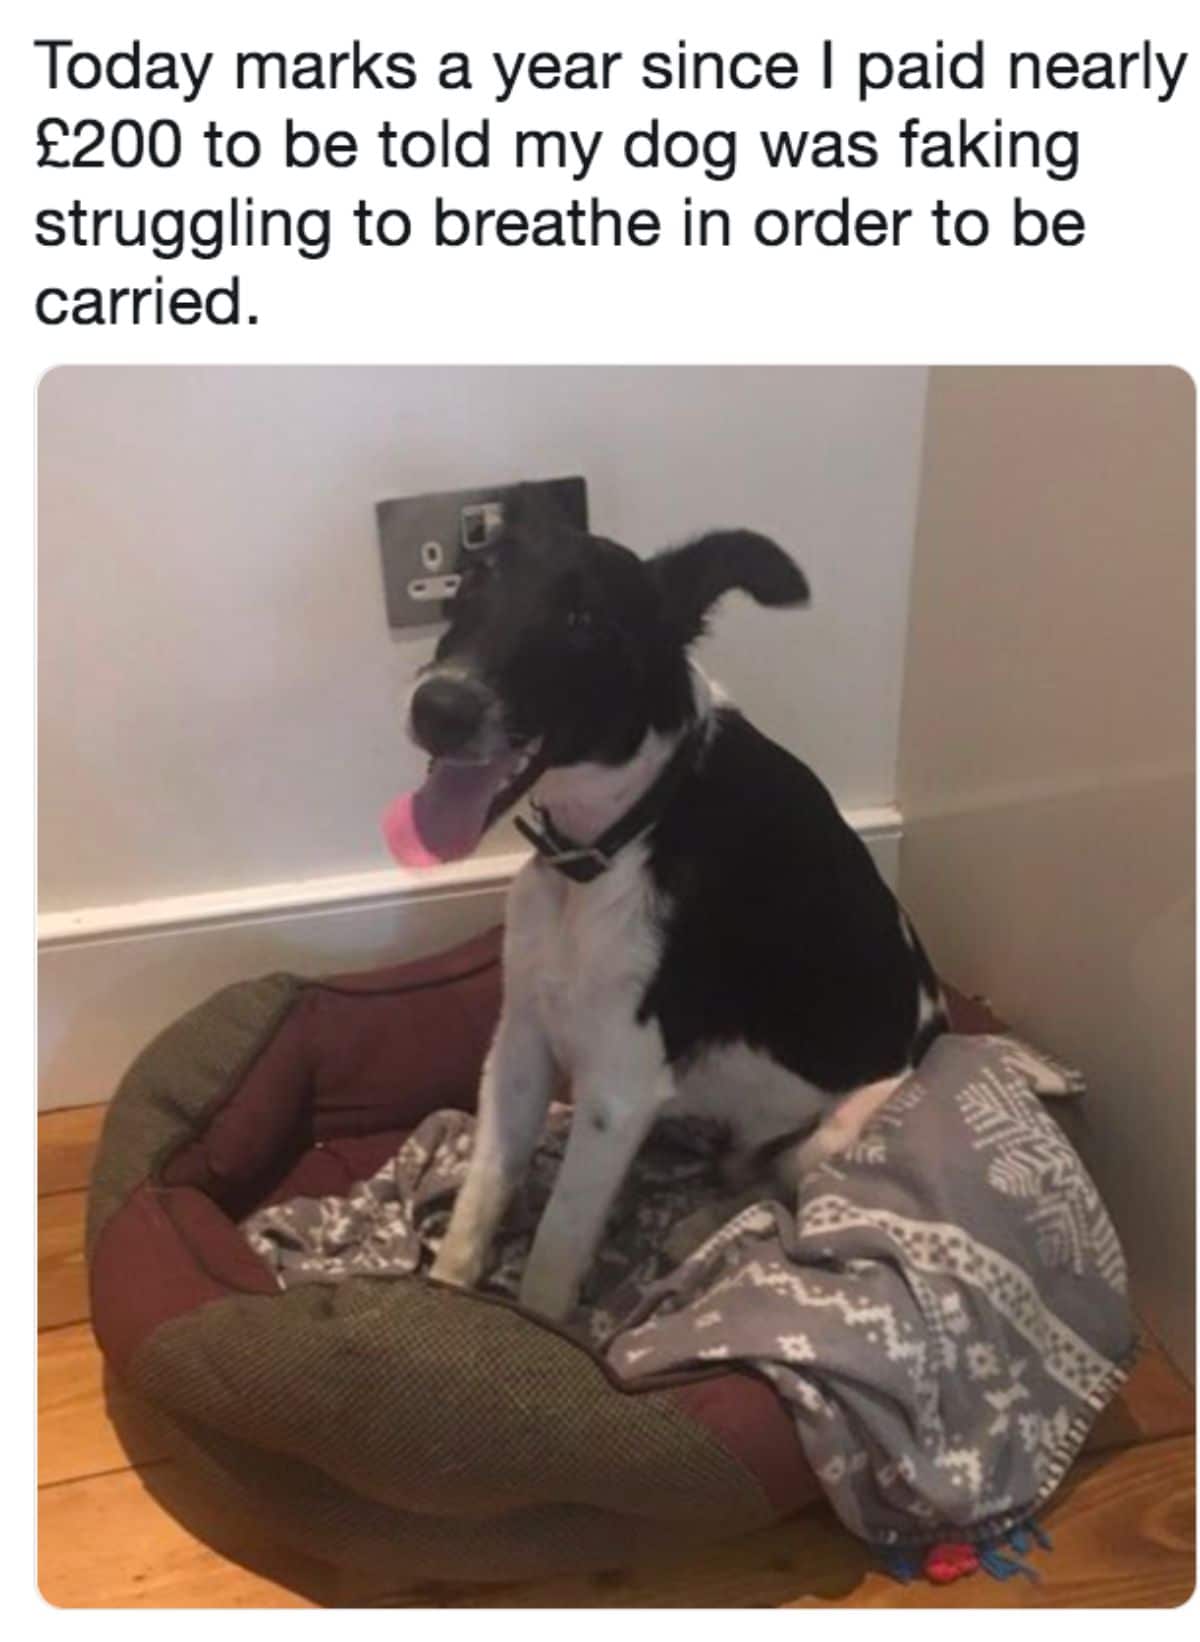 black and white dog sitting in a dog bed with caption saying today marks a year they paid 200 pounds to be told the dog was faking struggling to breathe to be carrier